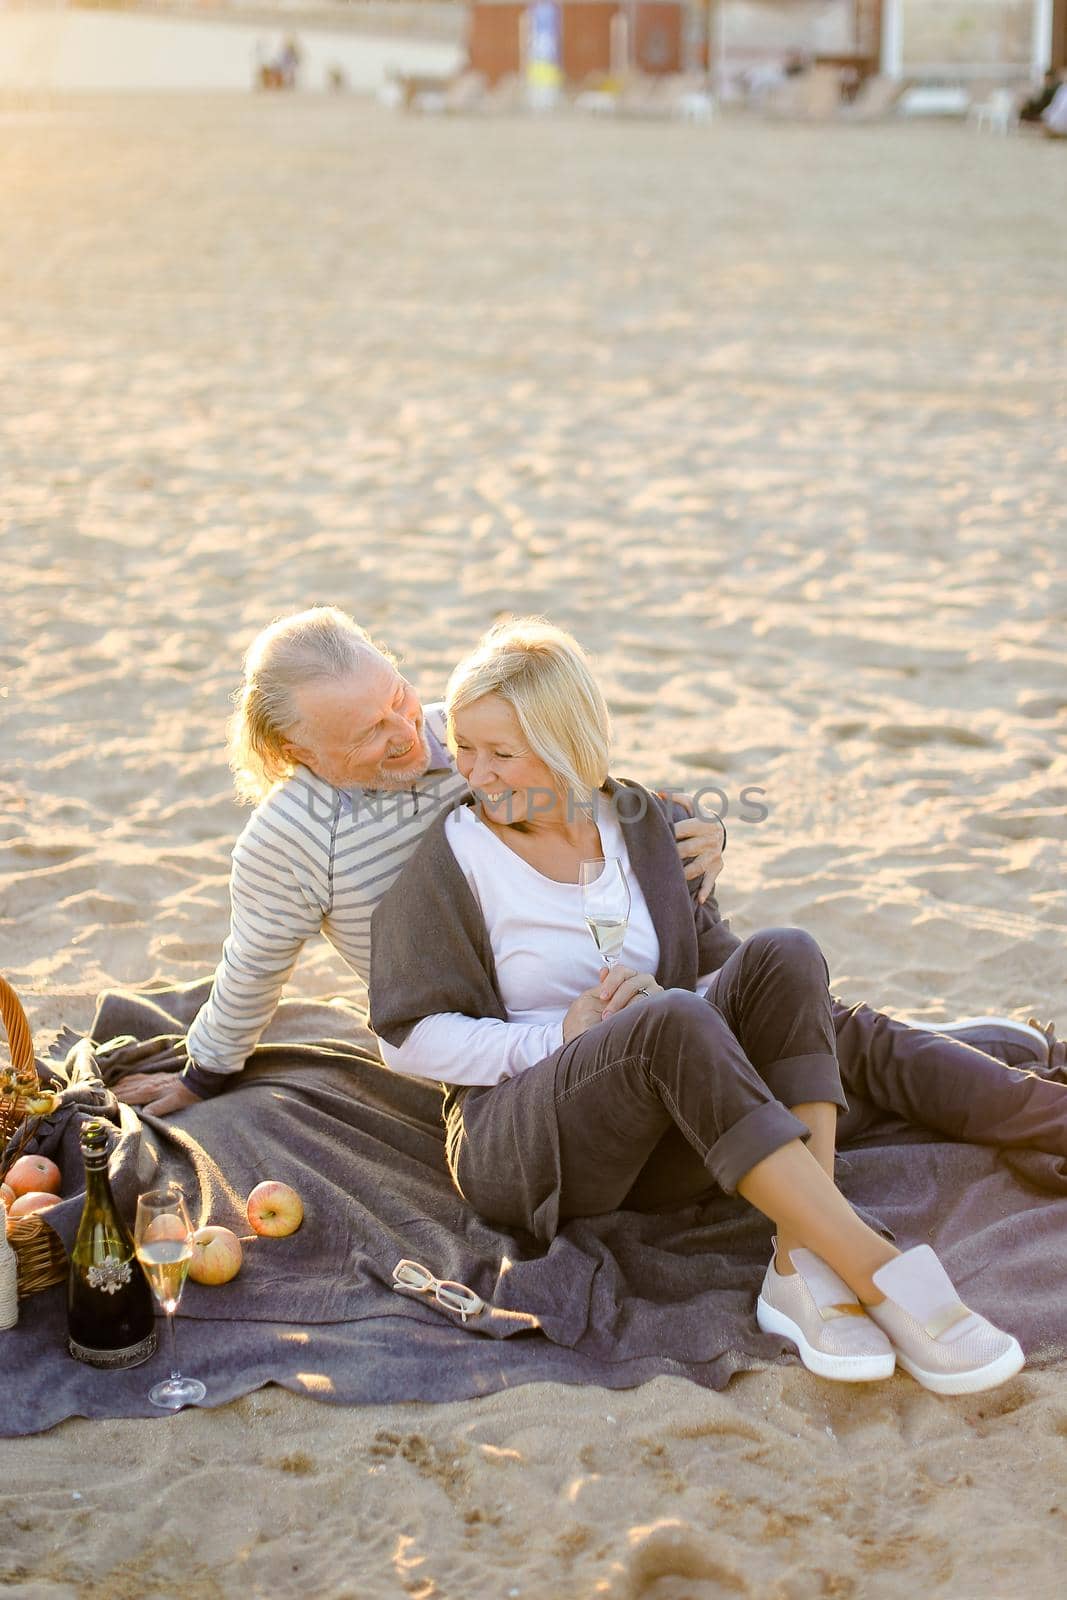 Sunshine photo of senior caucasian husband hugging wife sitting on plaid with champagne on sand beach. Concept of elderly couple on picnic.